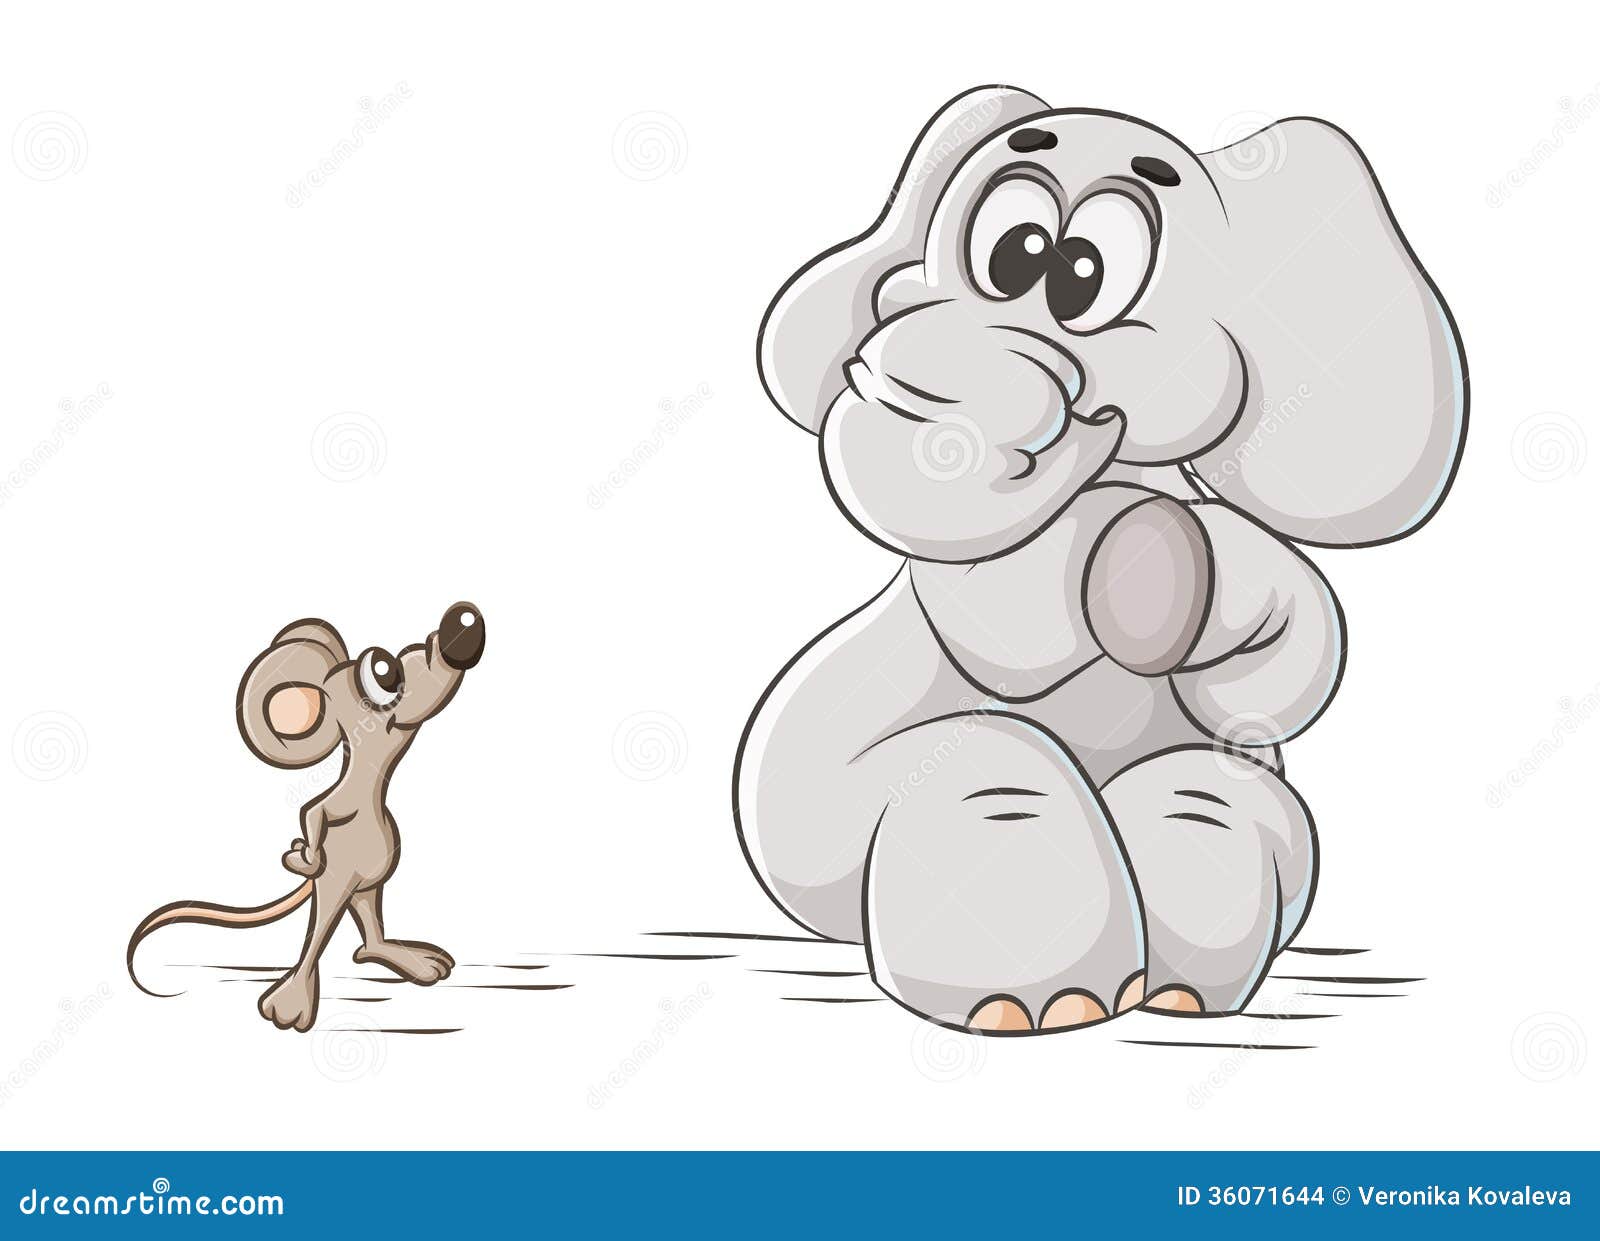 Elephant and mouse stock vector. Illustration of element ...